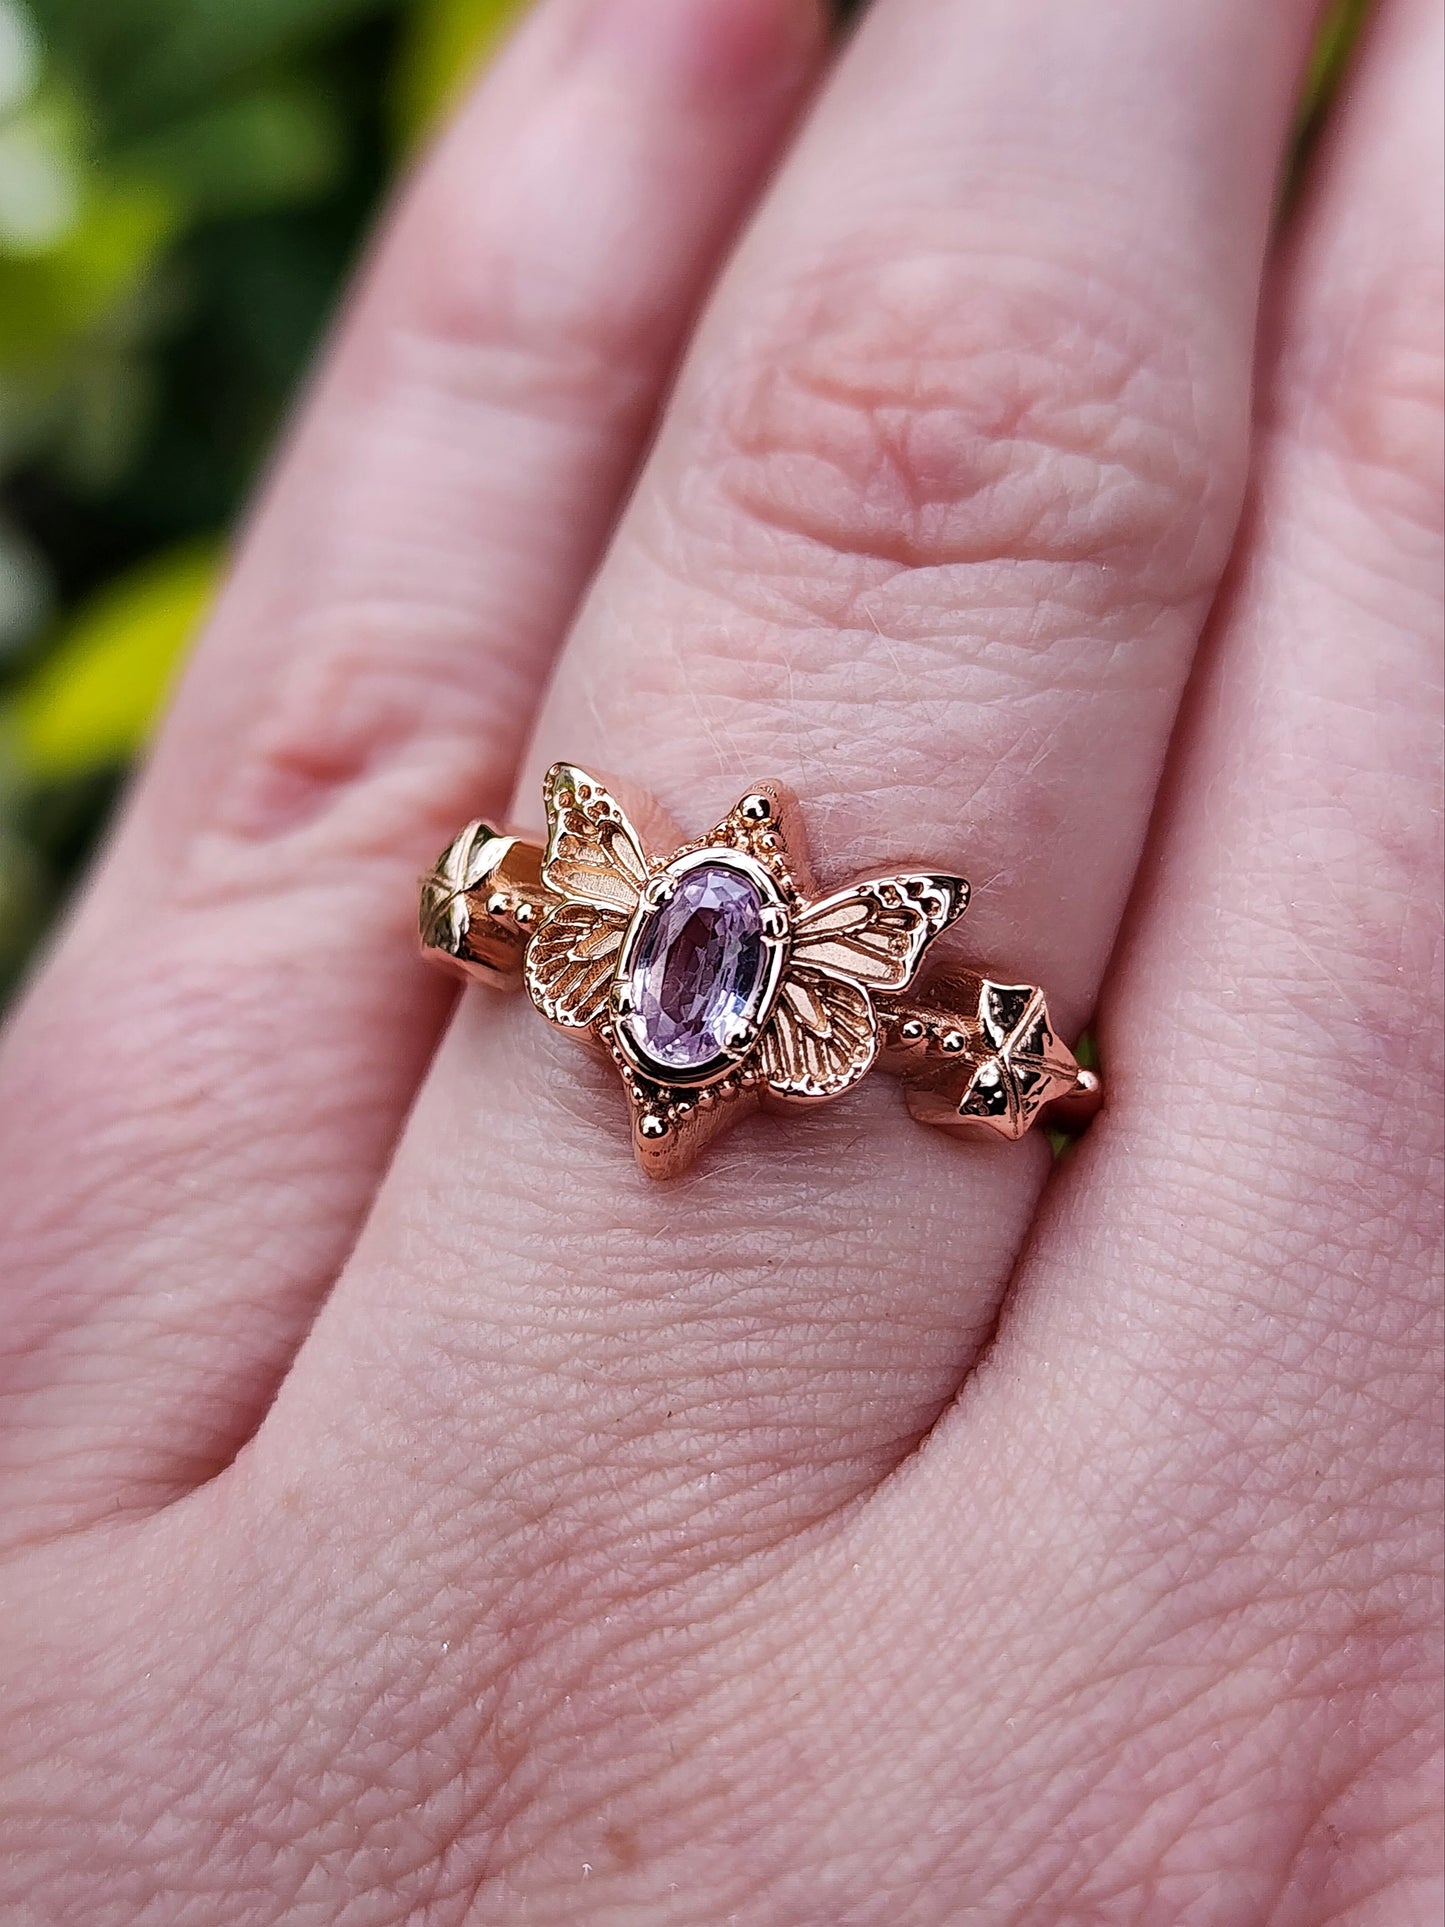 Butterfly Faerie Ring with Lavender Sapphire Fairy Fantasy Engagement with Ivy Leaf Fairytale 14k Rose Gold - Ready to Ship Size 6-8